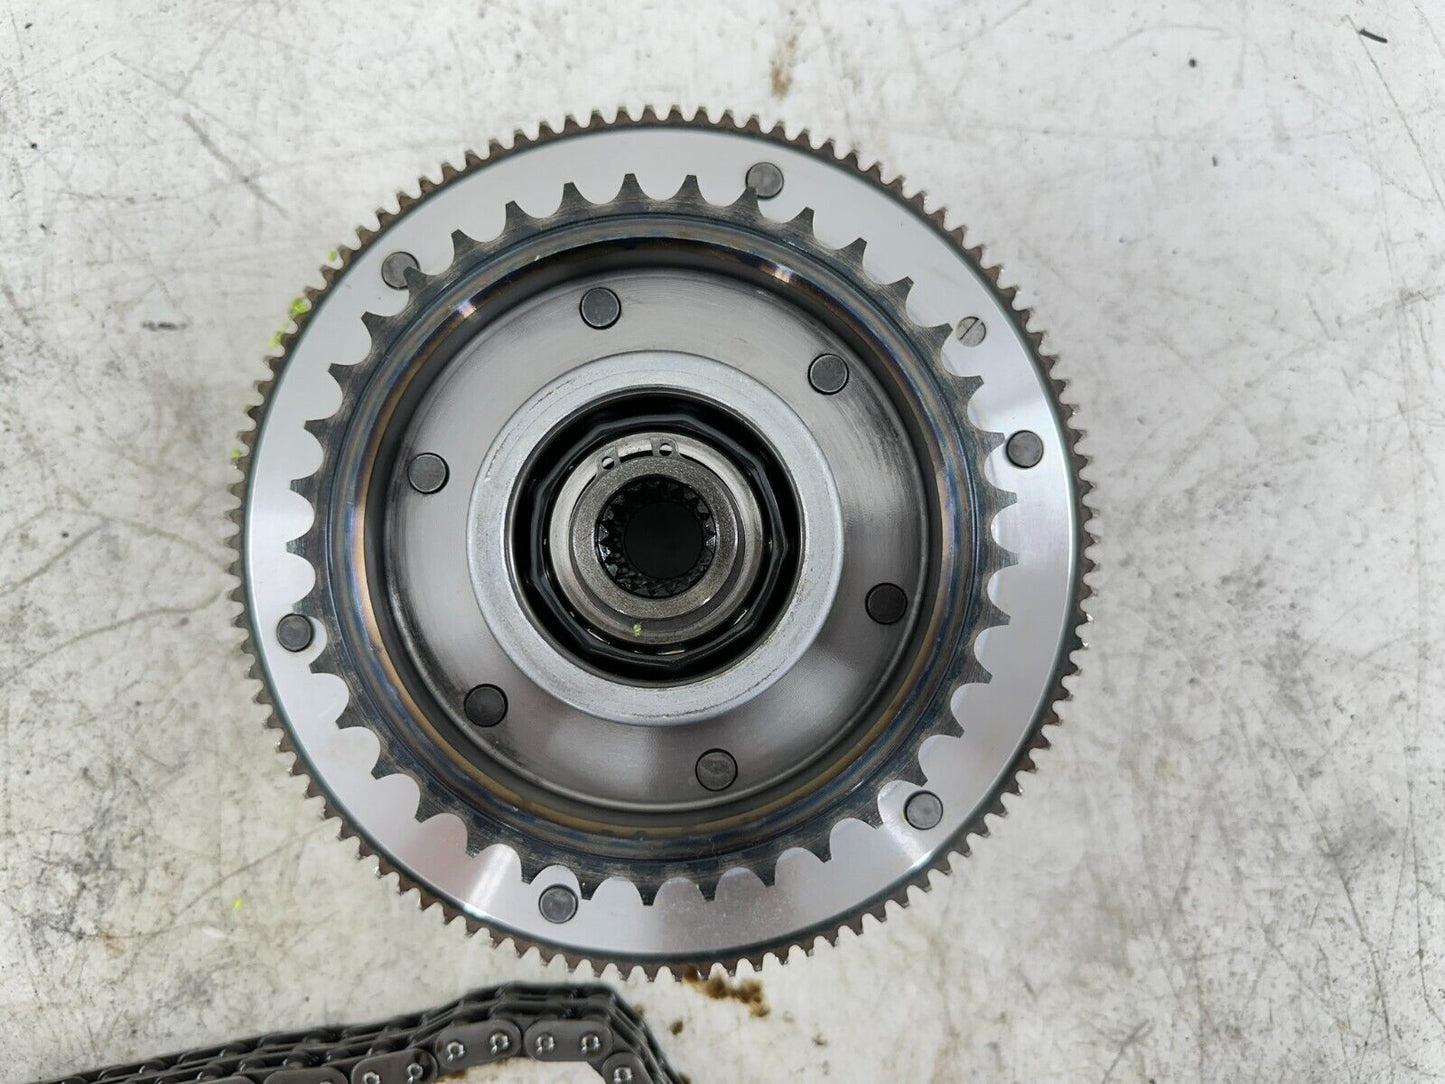 1999 HARLEY FLH ELECTRA GLIDE Primary Clutch Chain Gears OEM HD